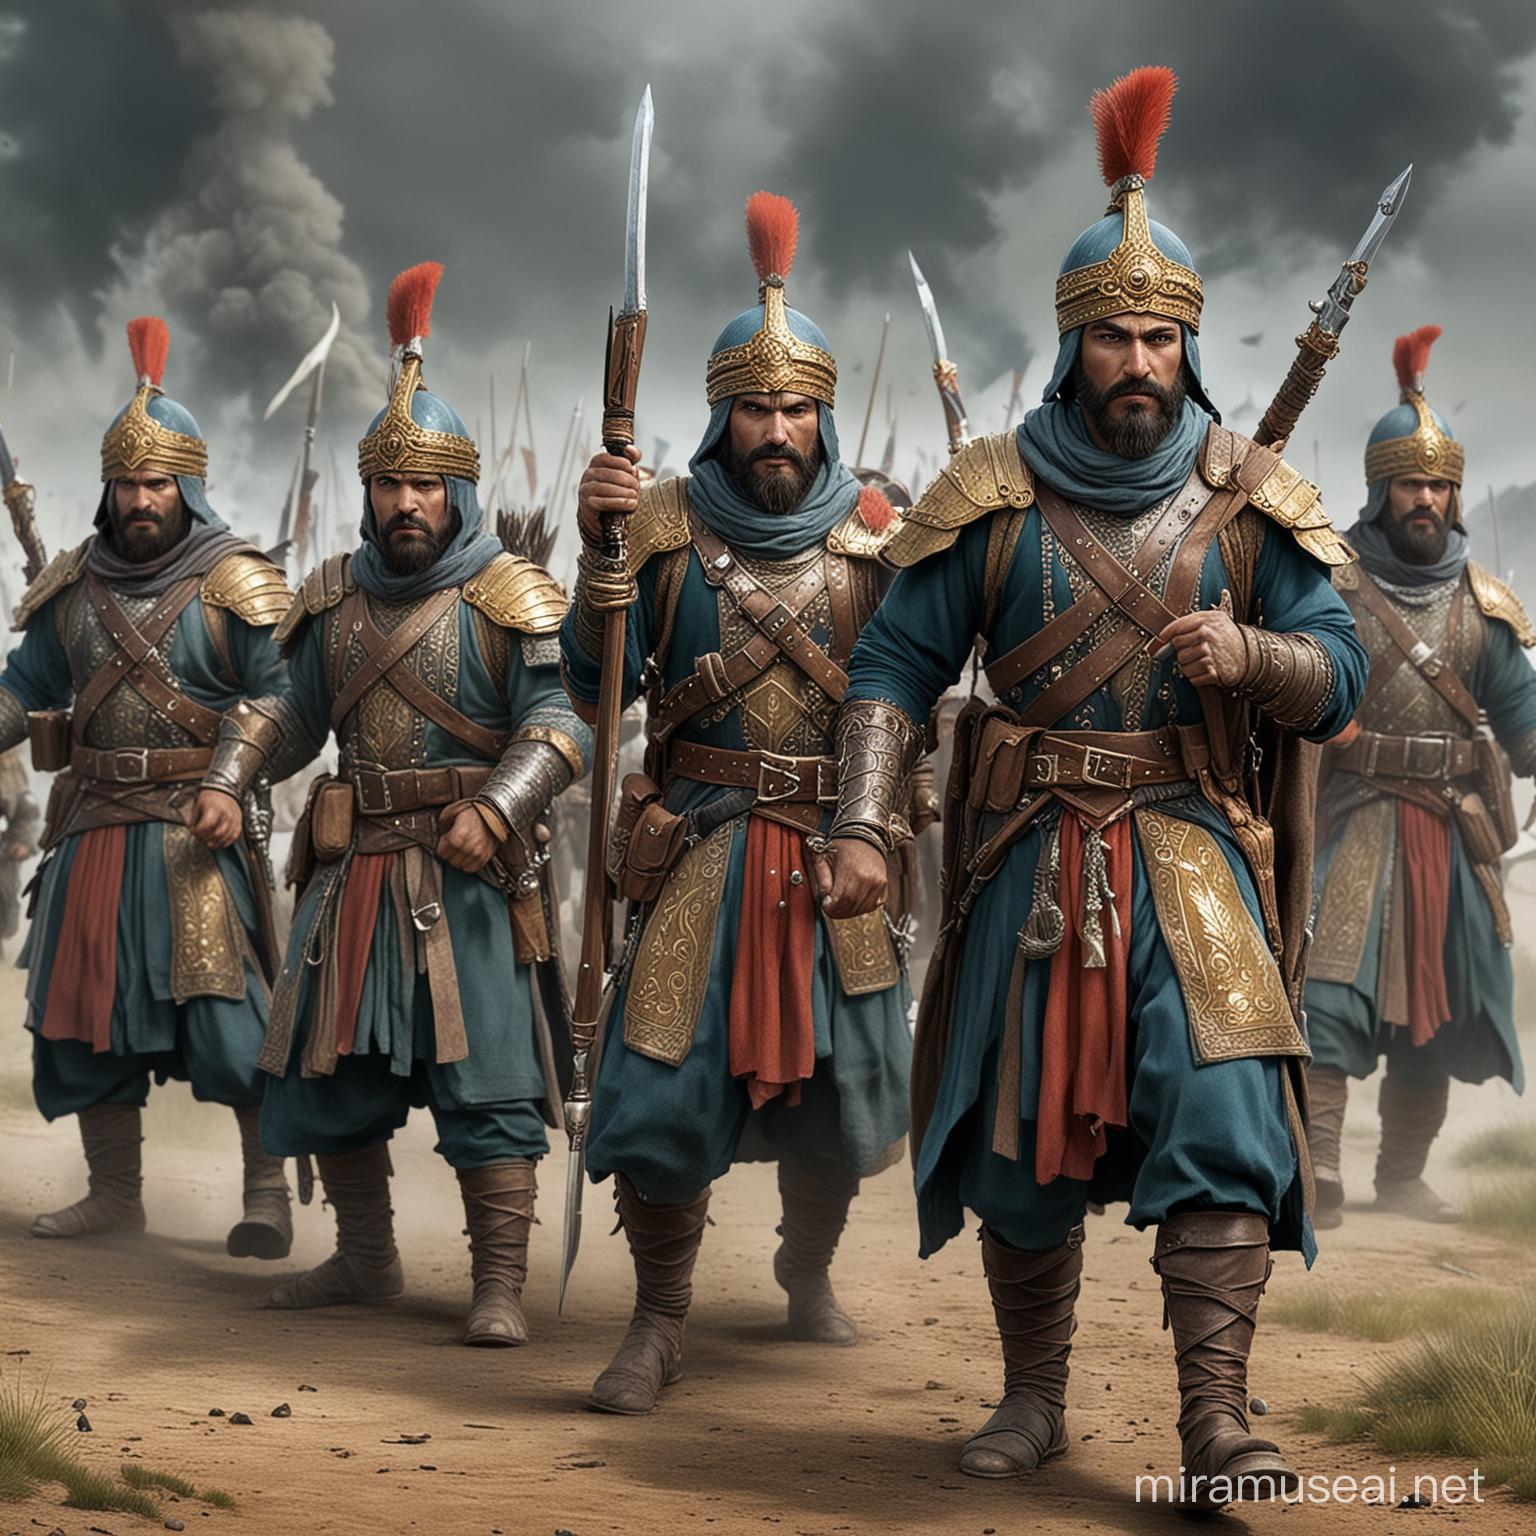 Janissary Infantry Marching through Middle Earth